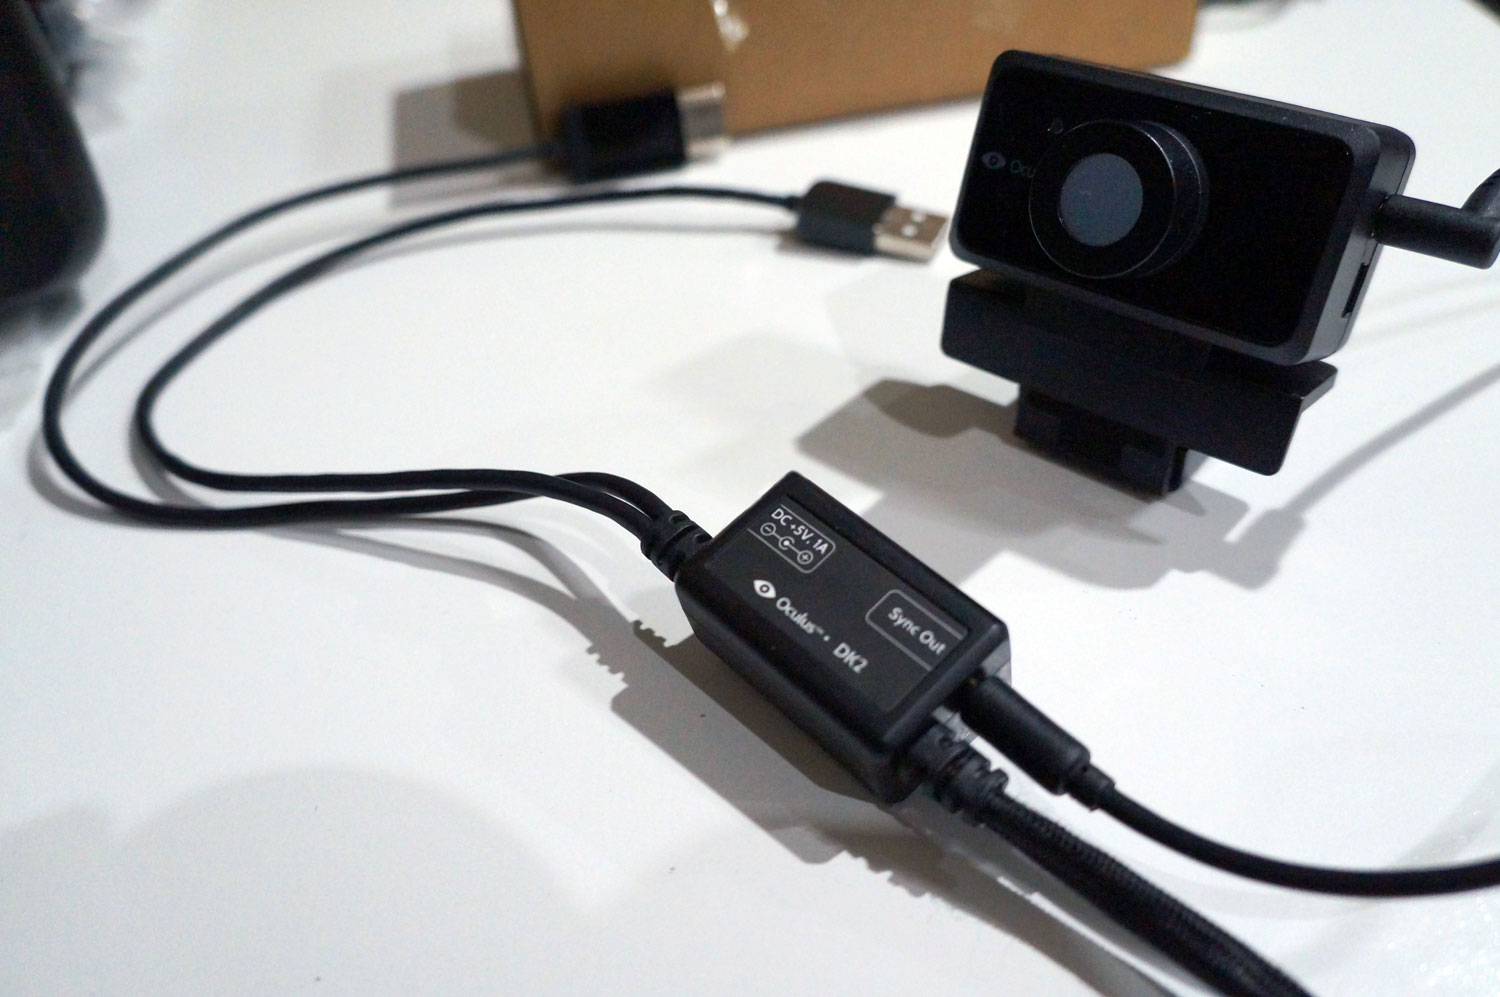 oculus rift hdmi cable